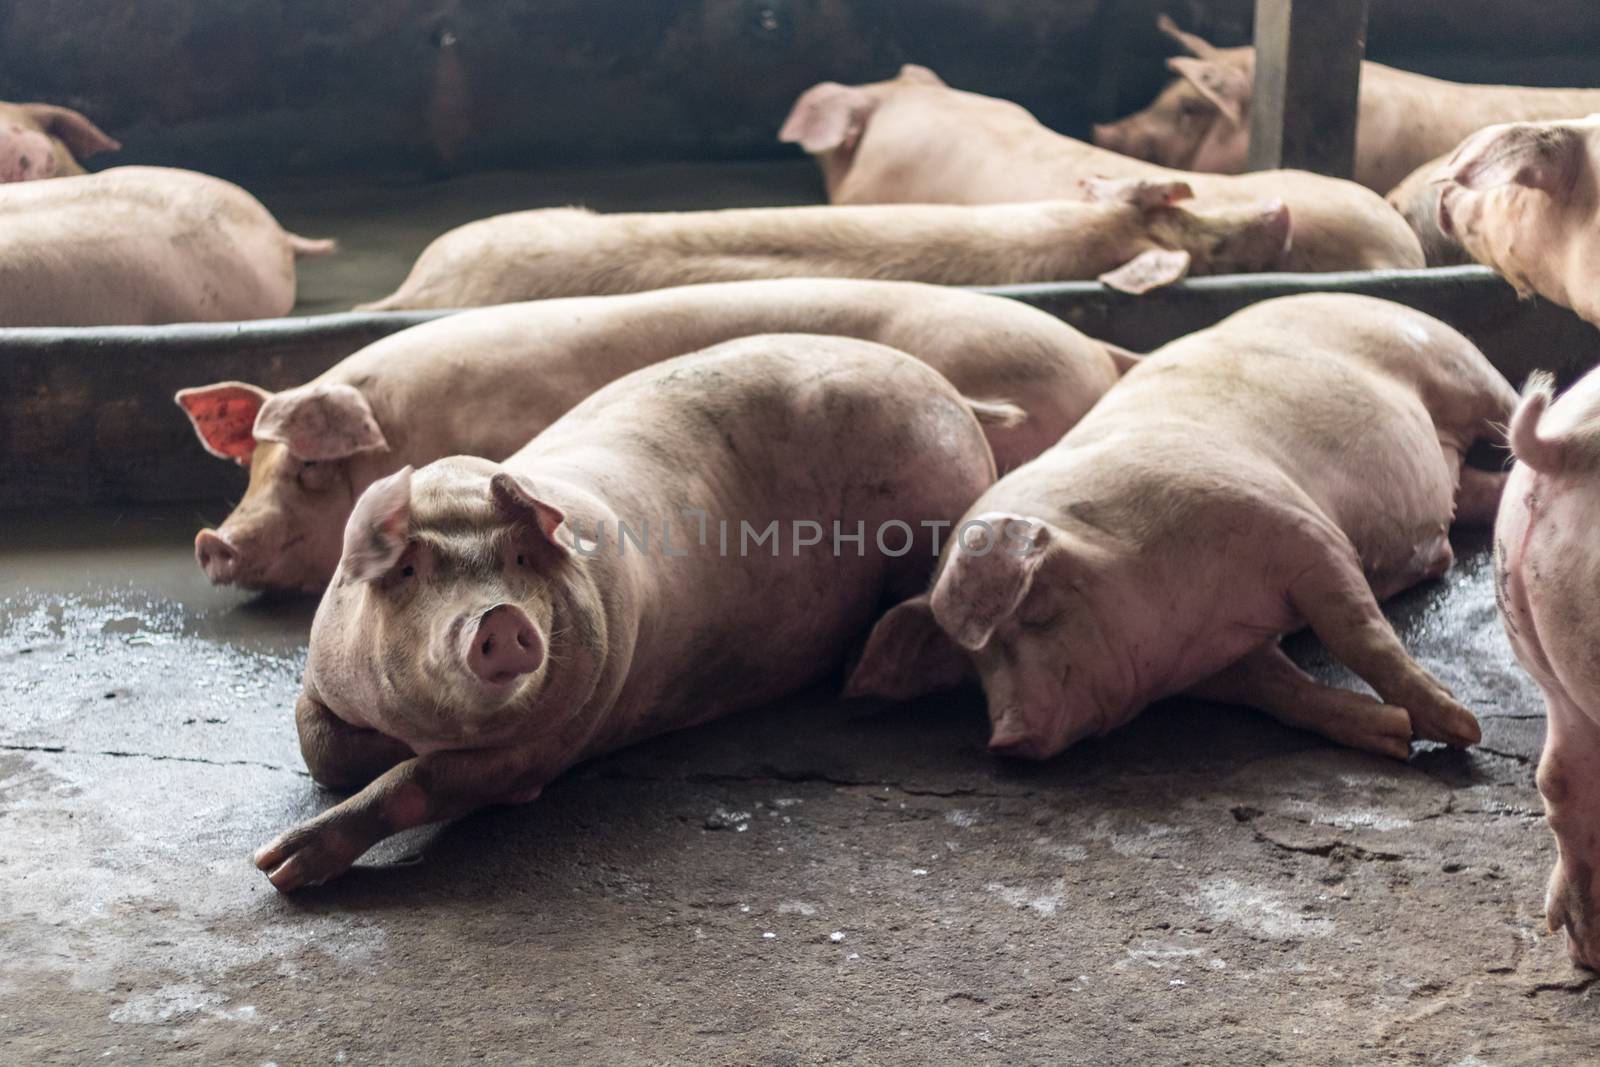 The fat pig is sleeping after eating a meal at the pig farm. Pig farm, closed system to prevent odors and germs. by minamija